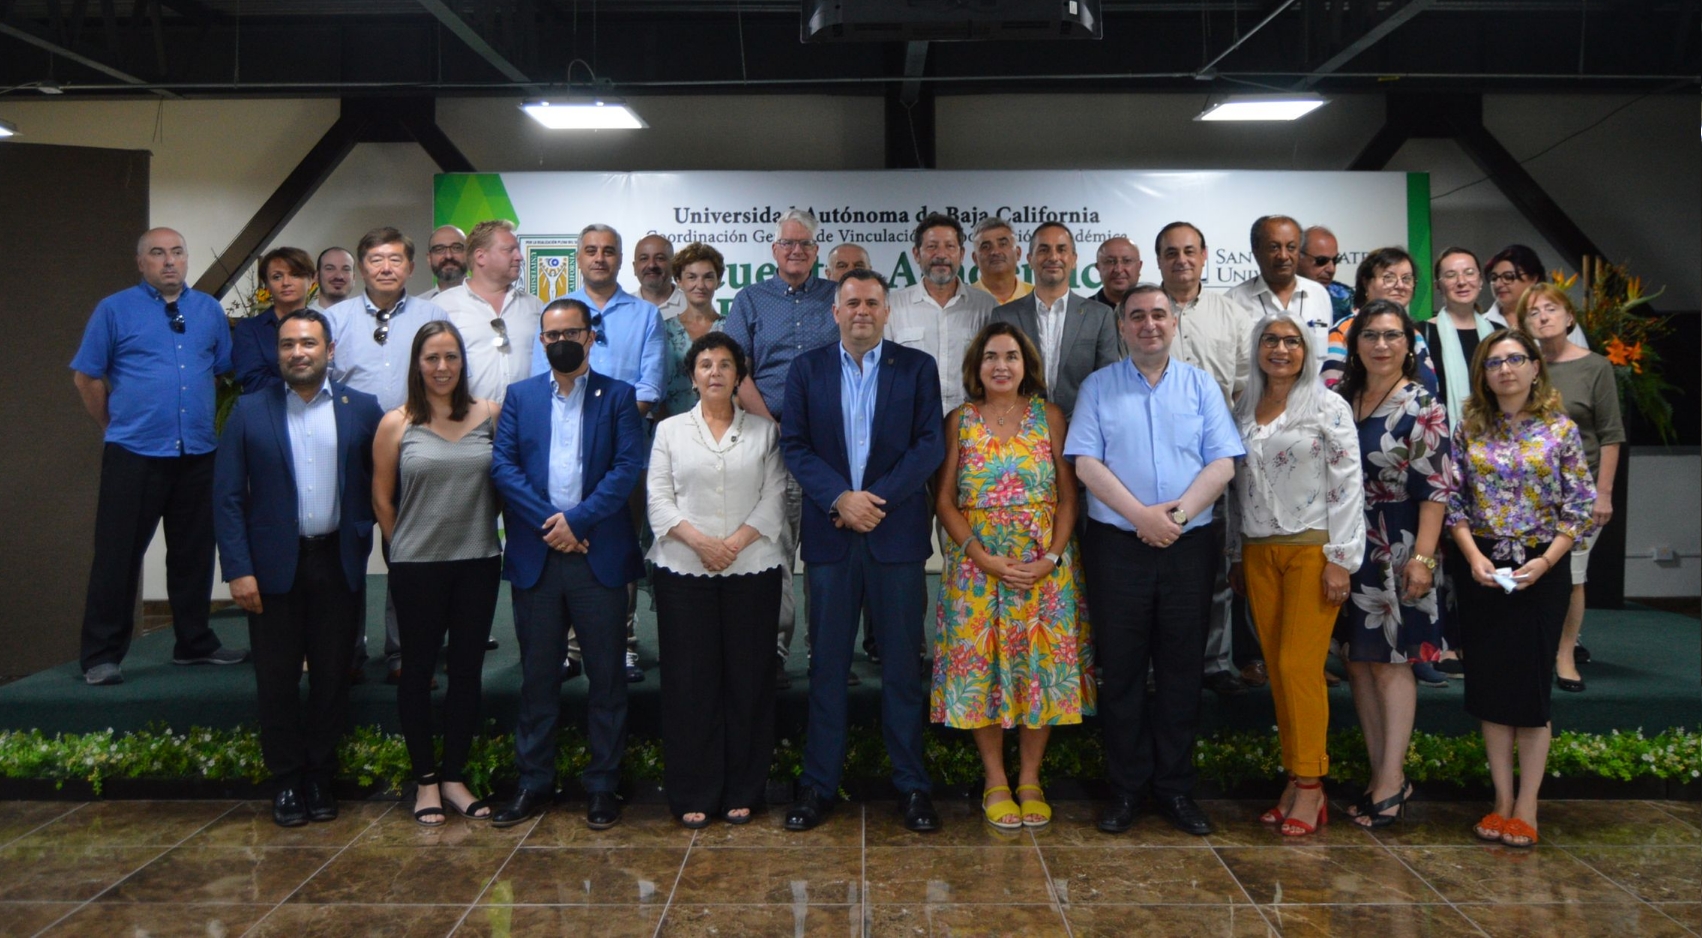 Representatives from SDSU, Mexico and Republic of Georgia discussed academic and educational projects at their meeting in Baja California, Mexico on Monday, Sept. 5, 2022. (SDSU)